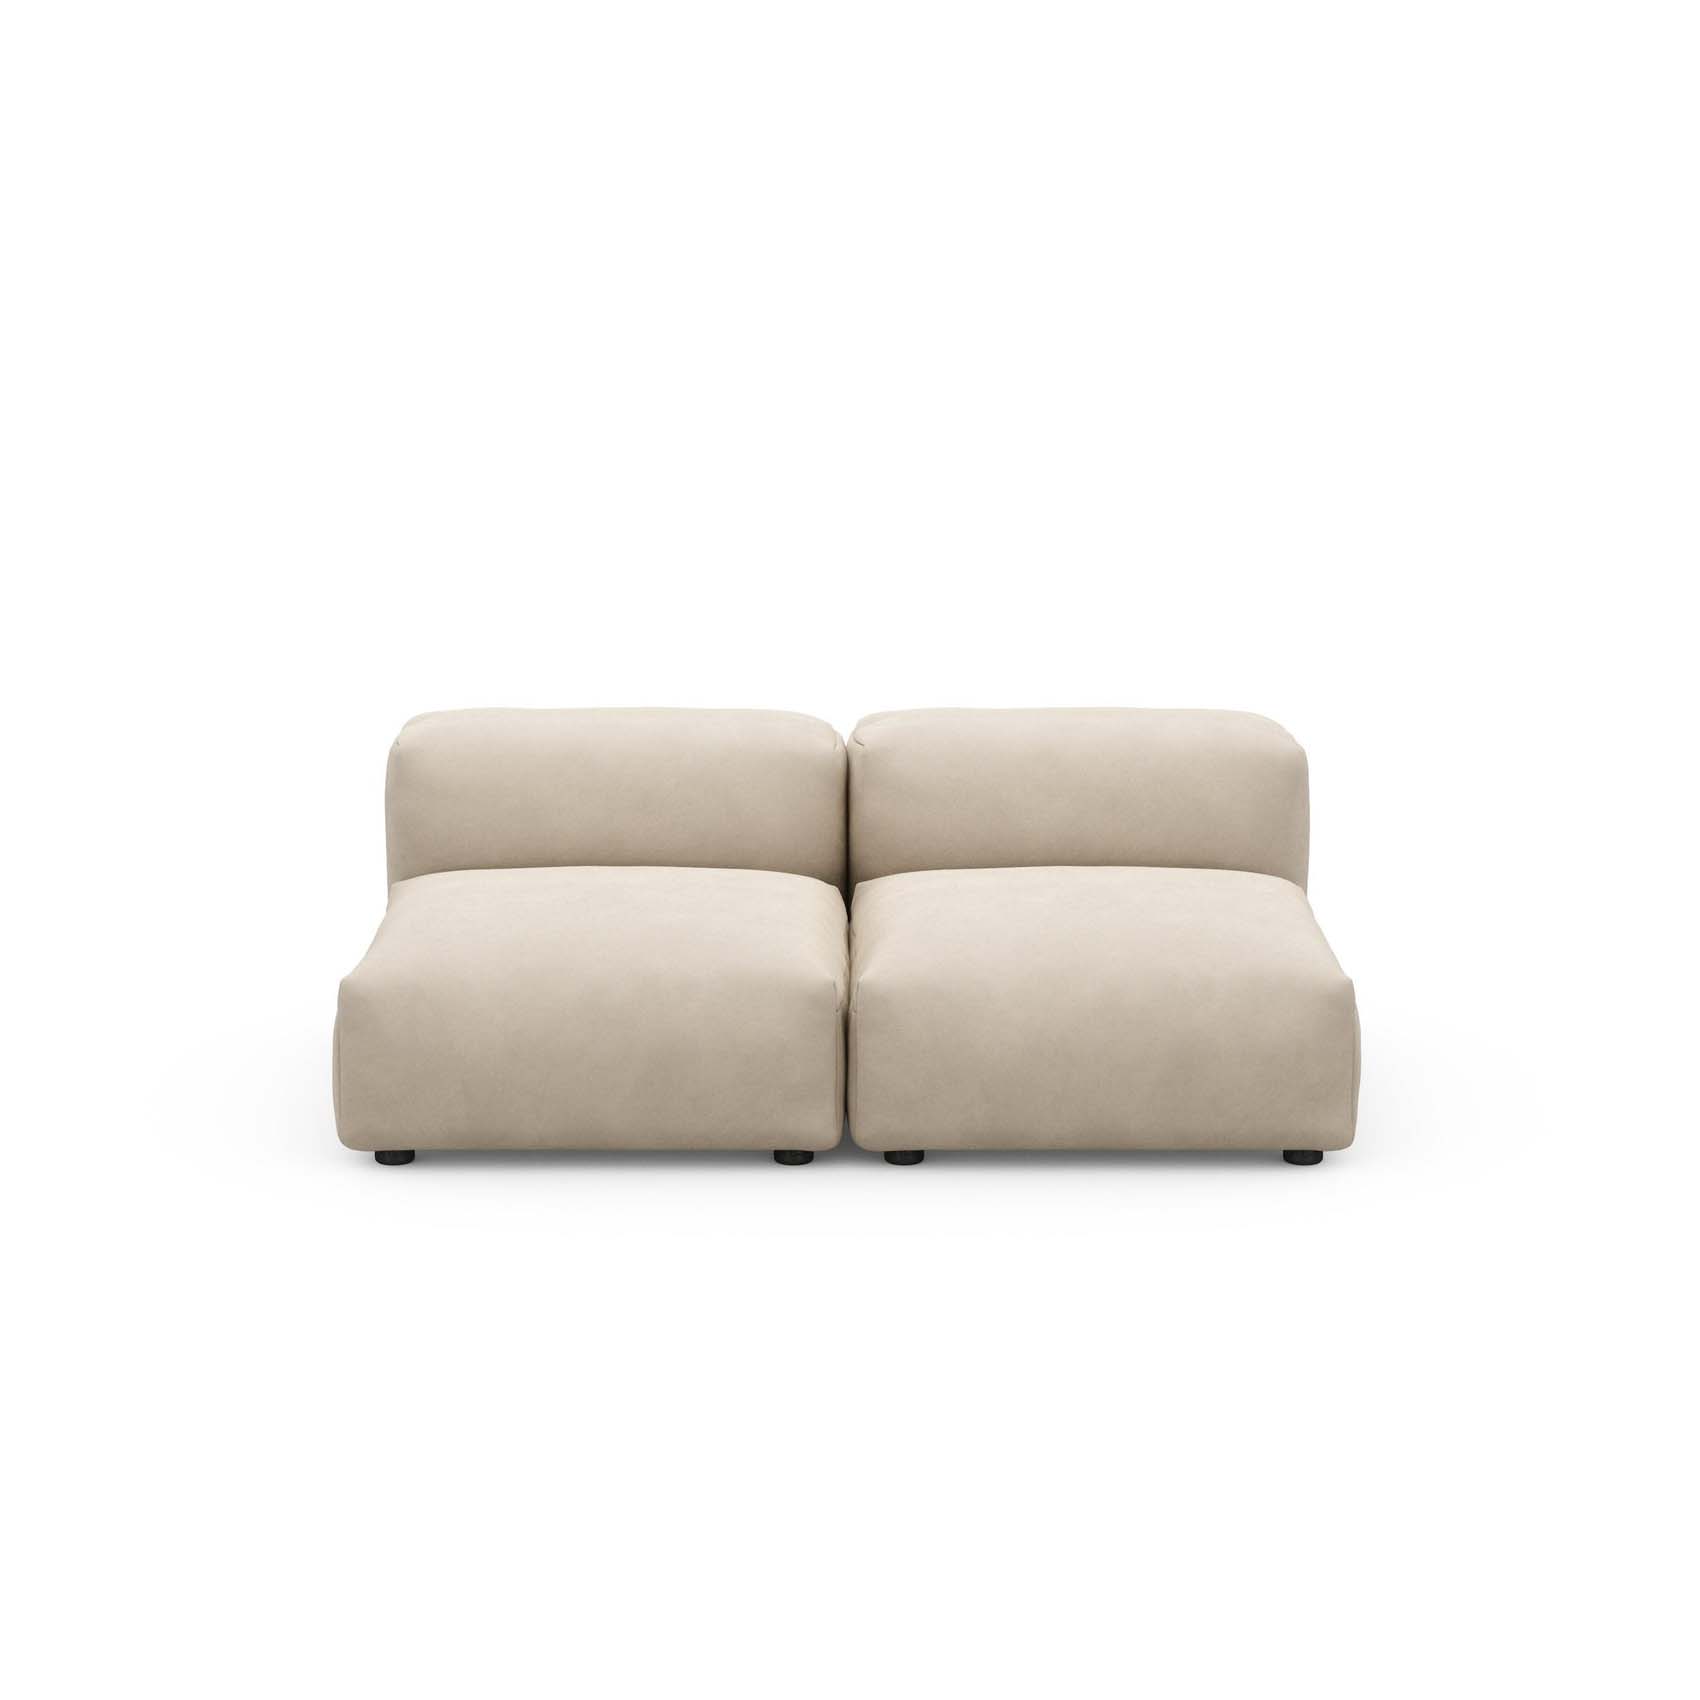 Two Seat Lounge Sofa S Canvas Beige